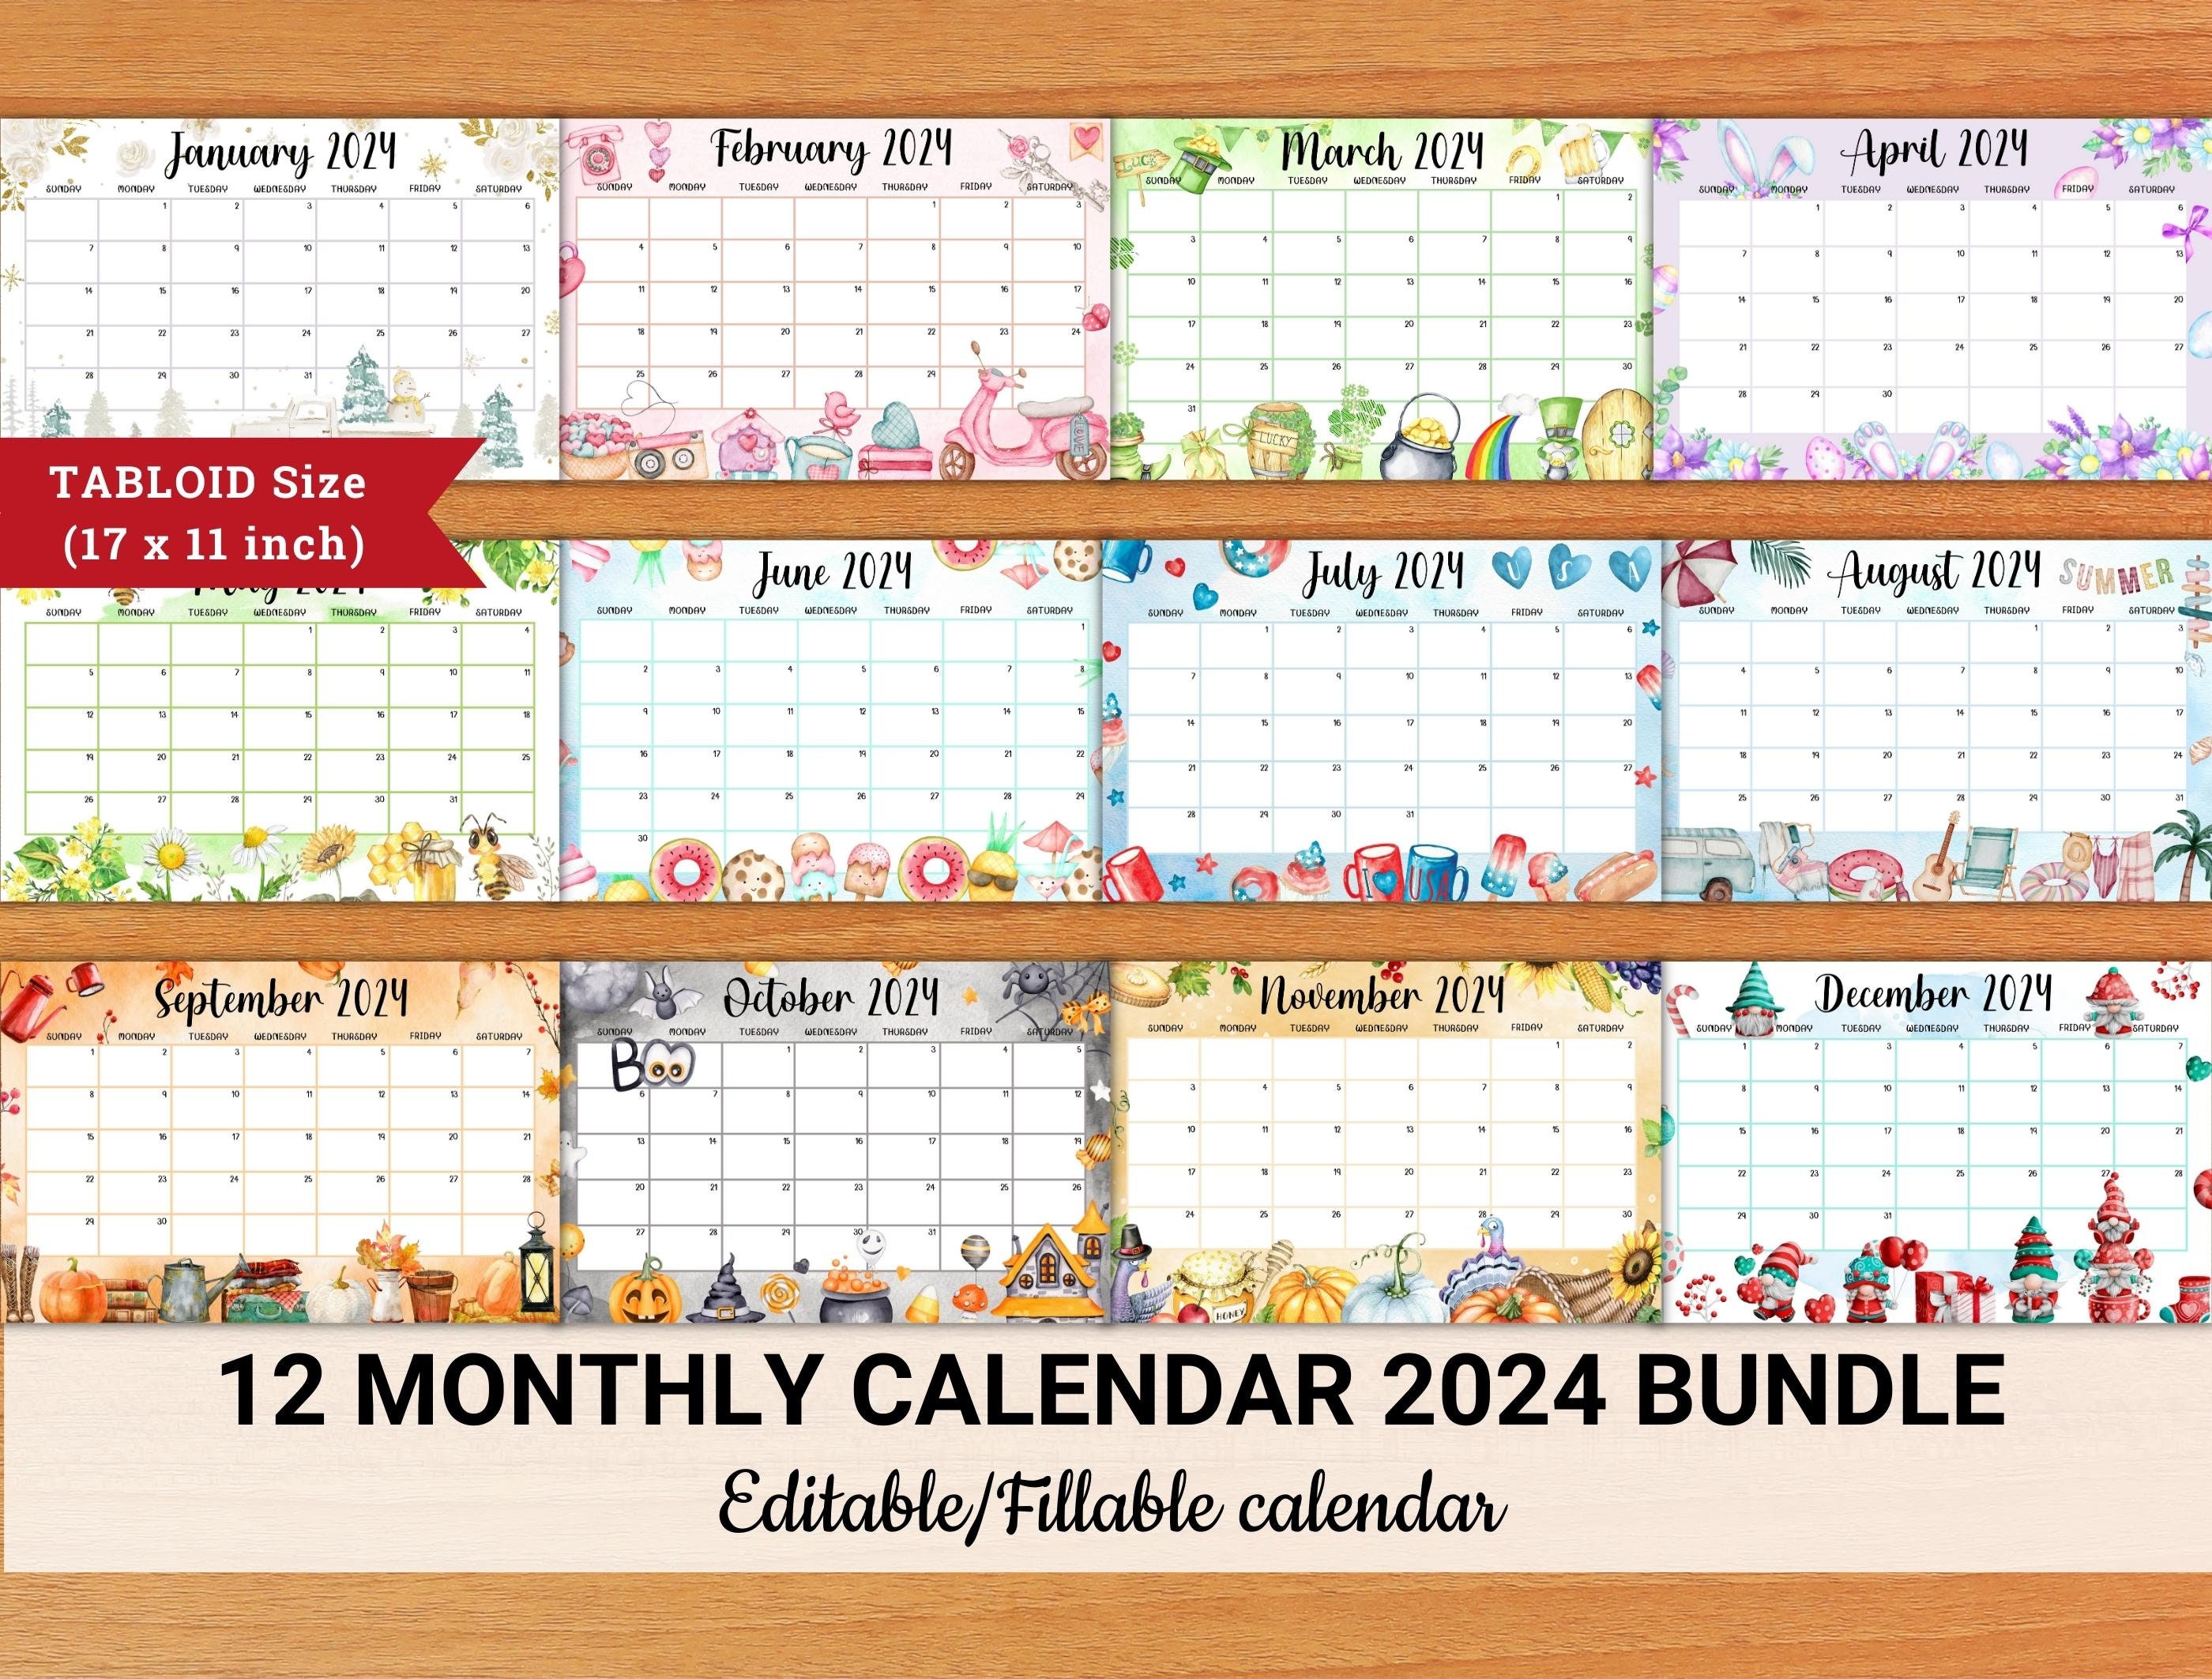 Monthly Planner Printable October 2023, Printable Calendar for